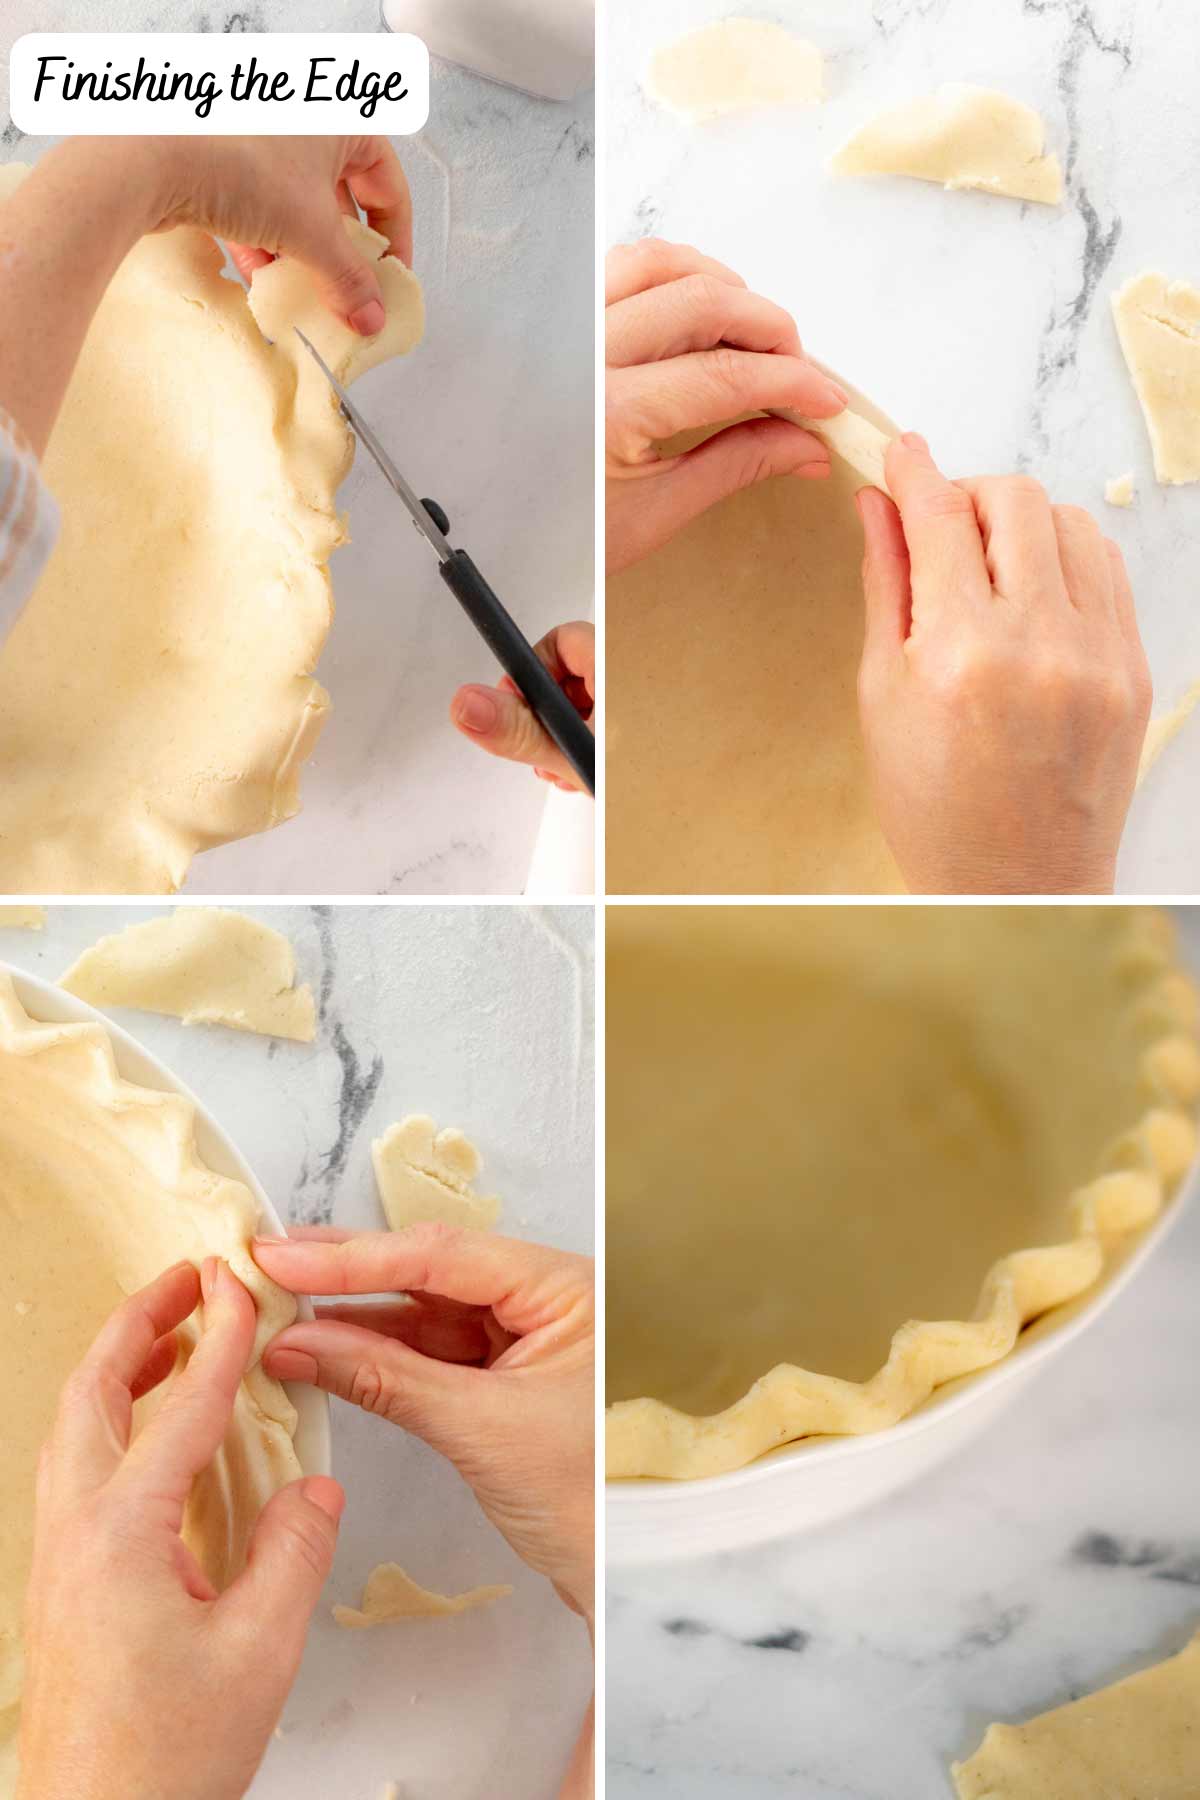 Person snipping the edge of the pie dough and creating pleats around the edges.